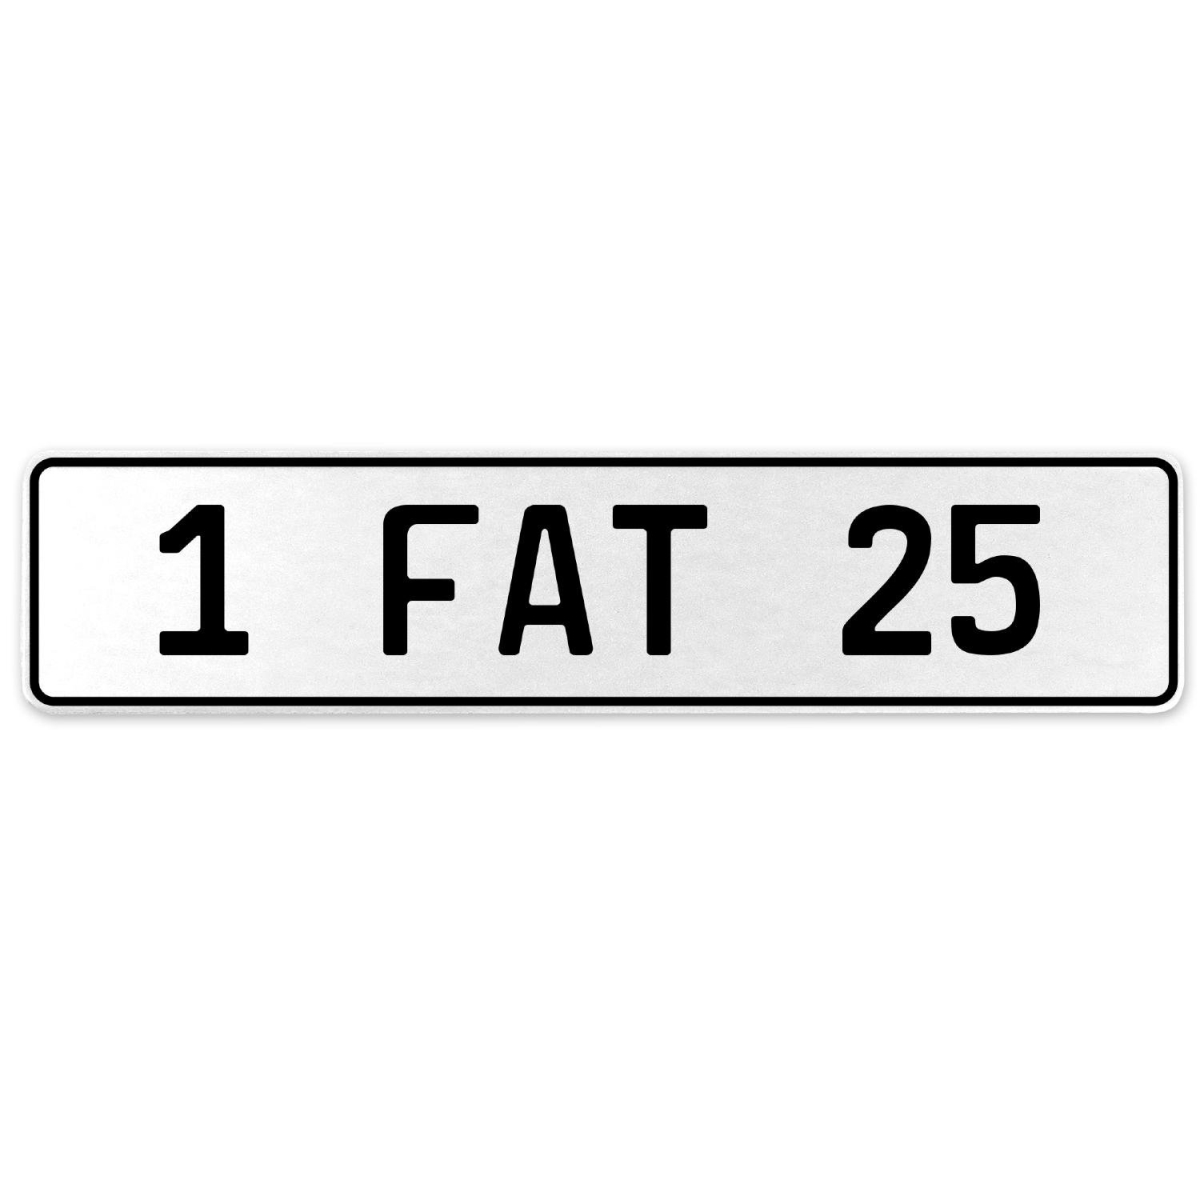 554622 1 Fat 25 - White Aluminum Street Sign Mancave Euro Plate Name Door Sign Wall